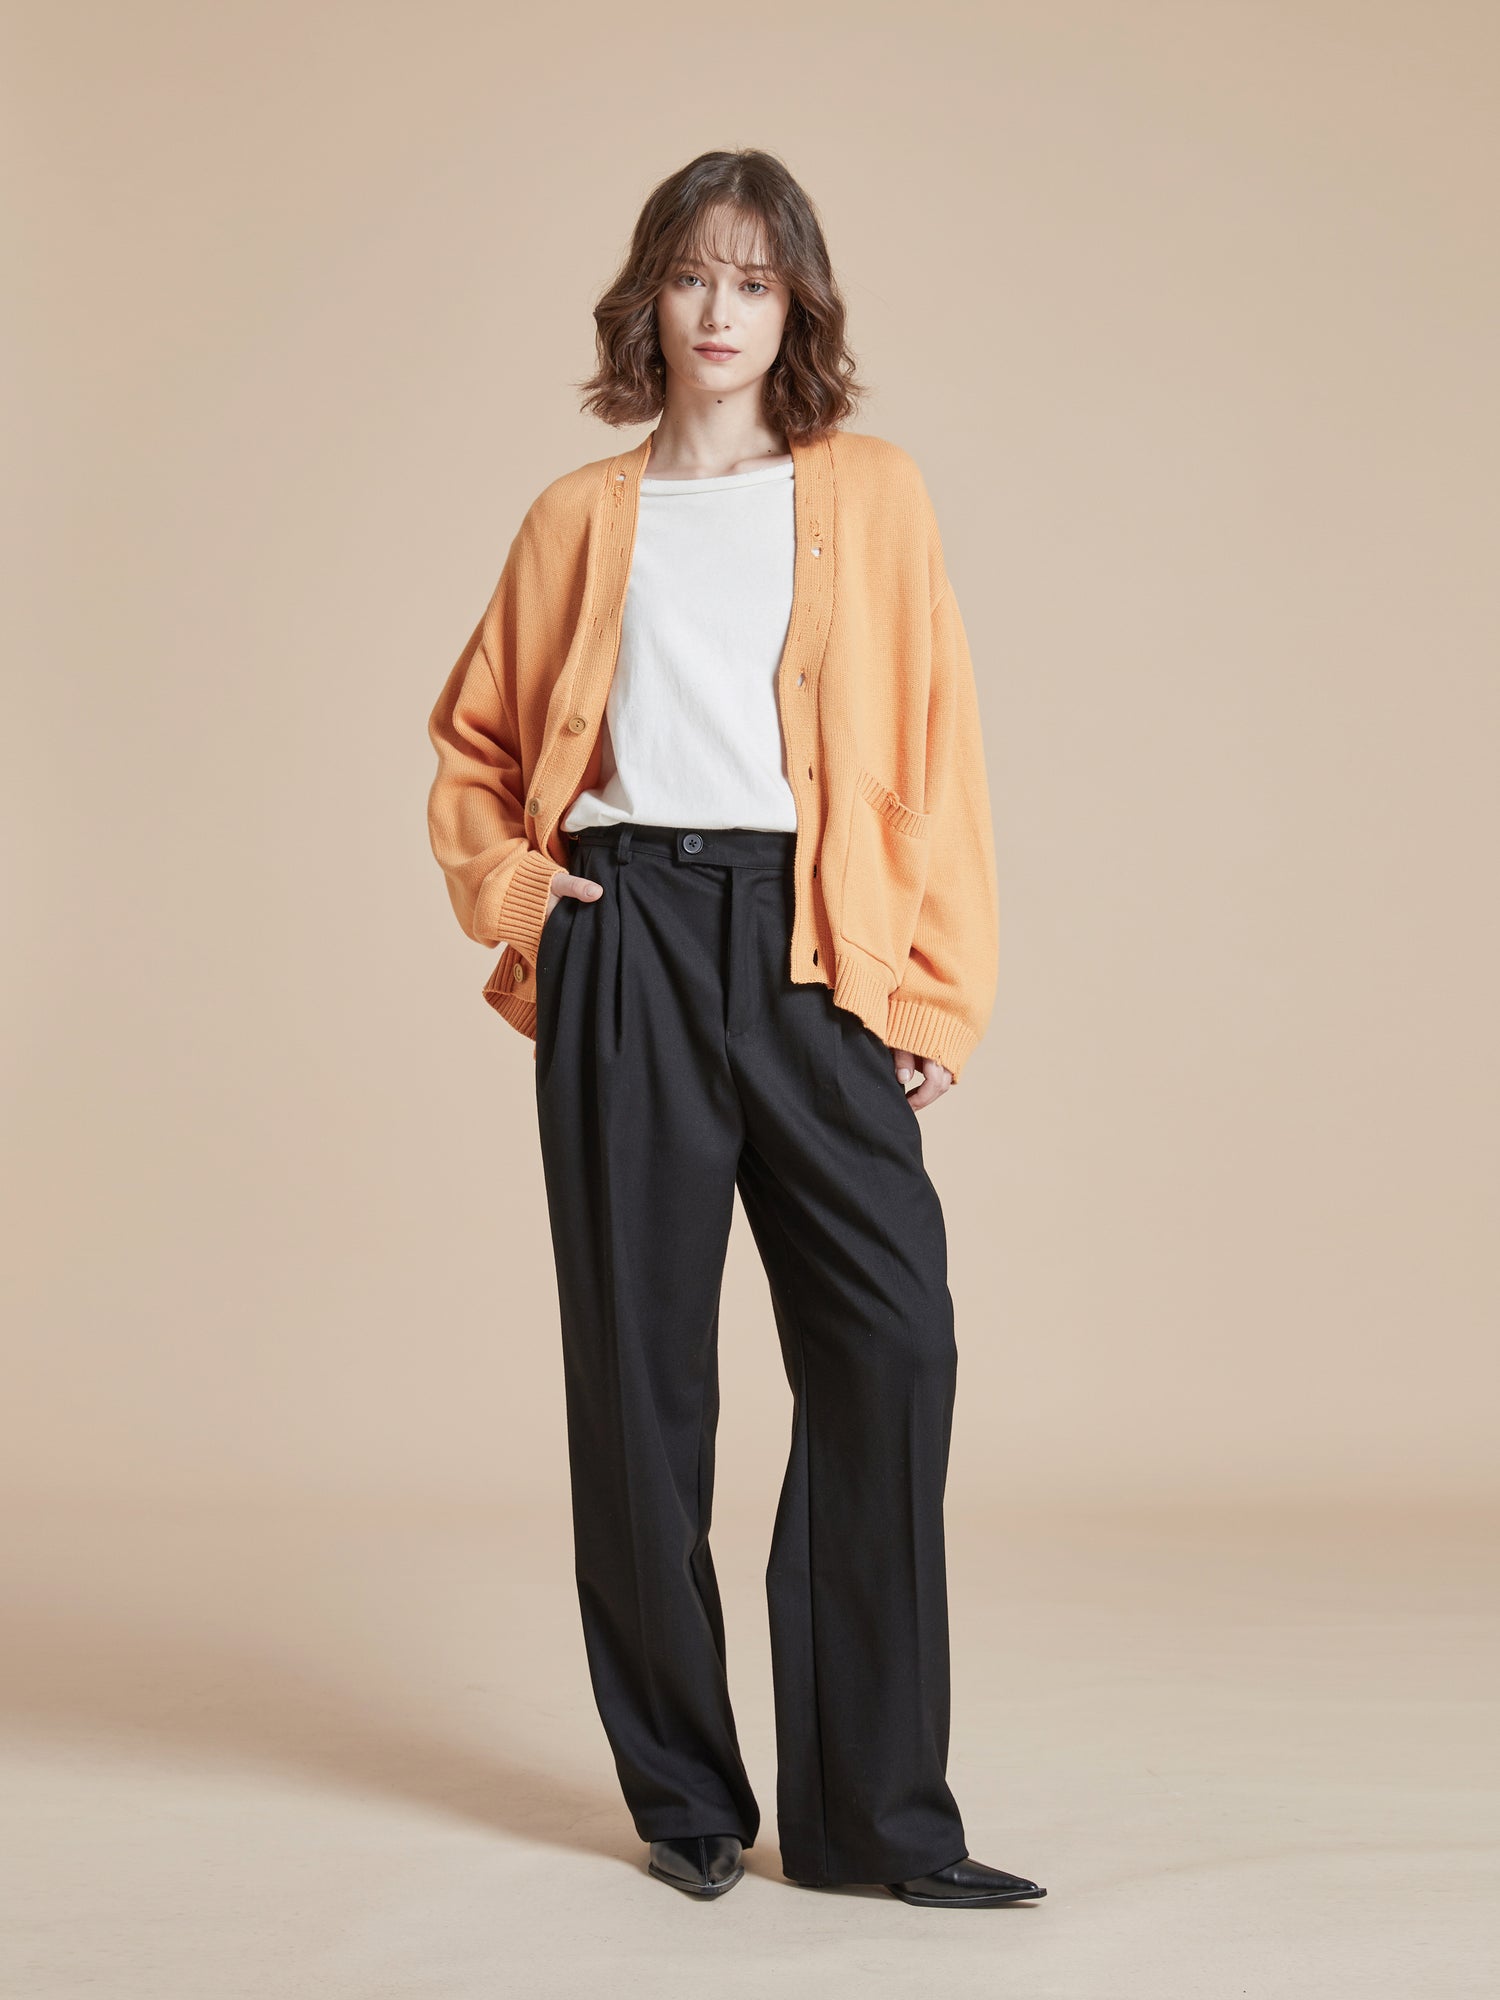 The model is wearing a classic cardigan and black Found Pleated Trousers to create a stylish silhouette.